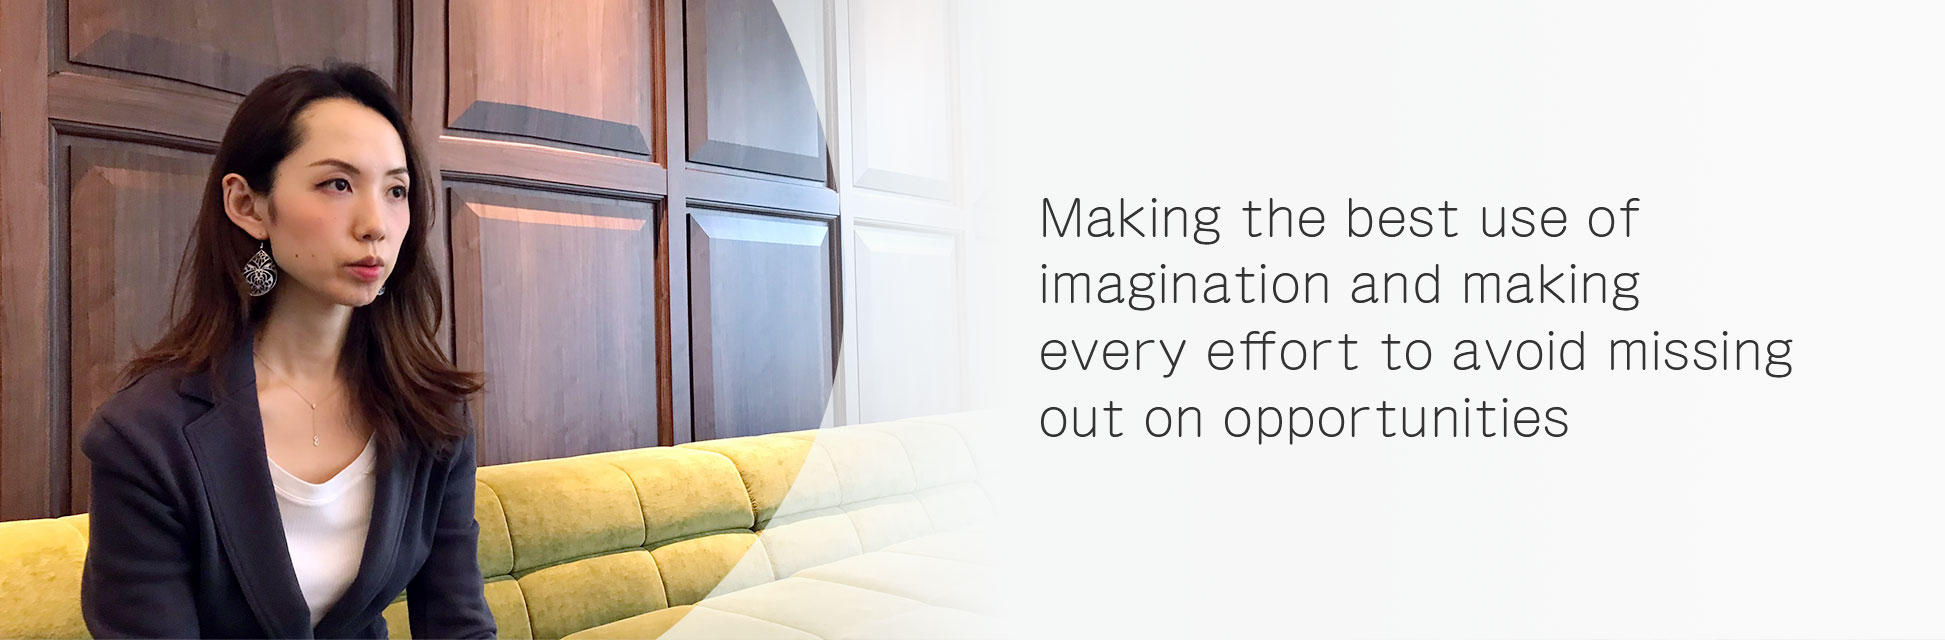 Making the best use of imagination and making every effort to avoid missing out on opportunities